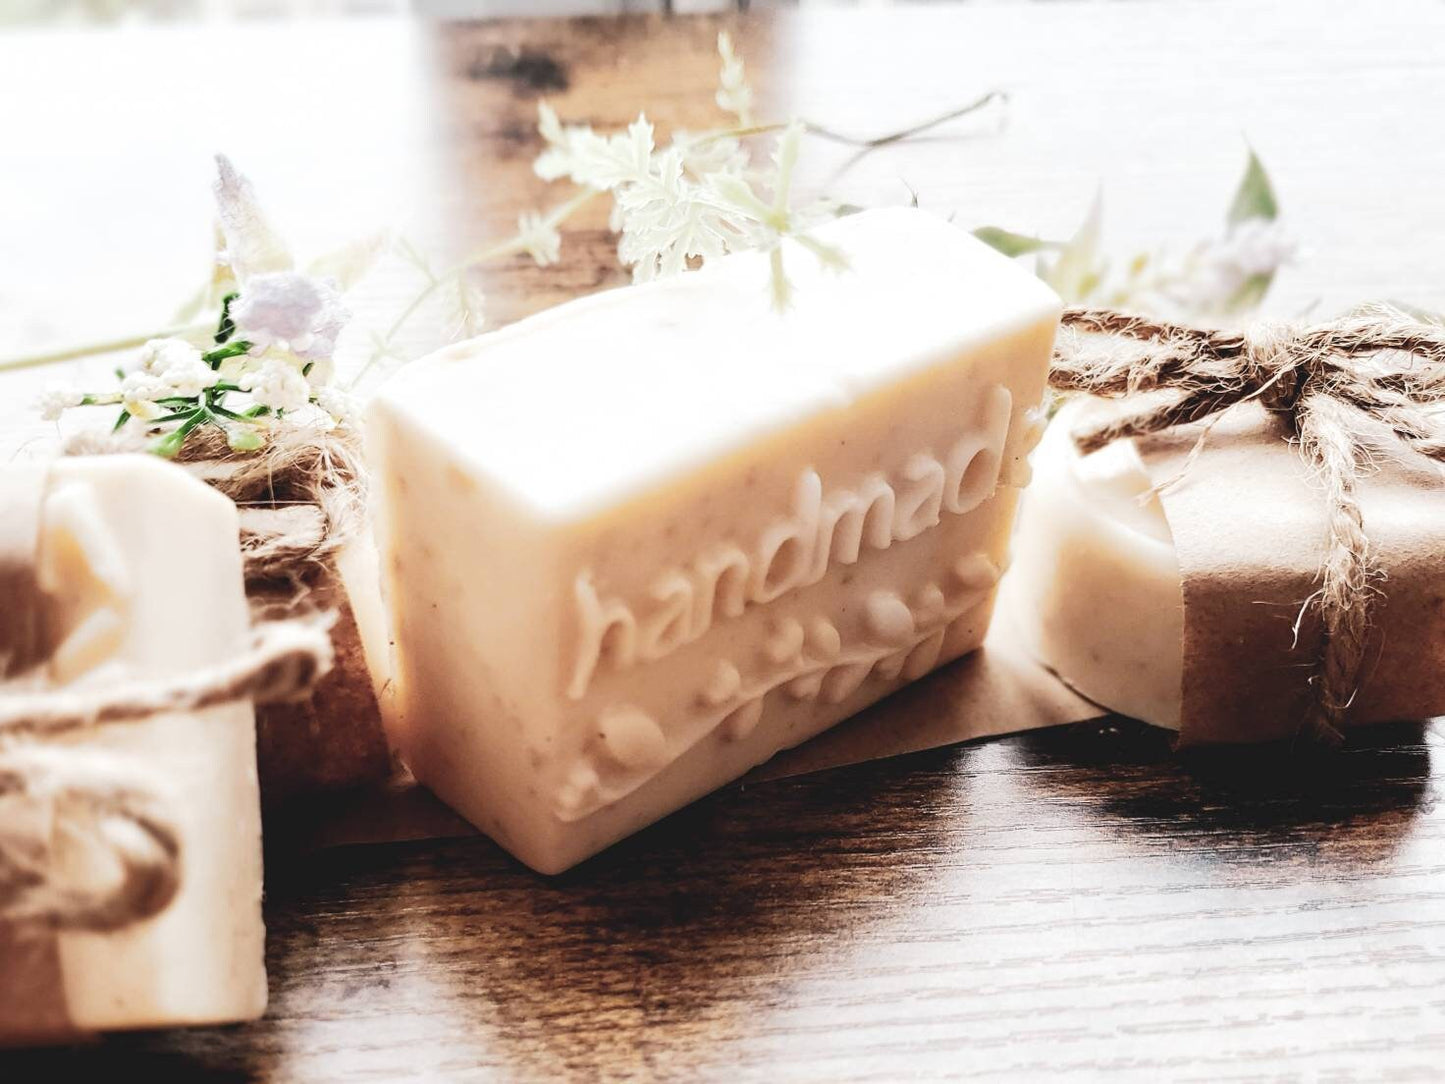 Multi-Pack of Unscented Vegan Guest Soaps - A Perfect Healthy Option for Your Guests!